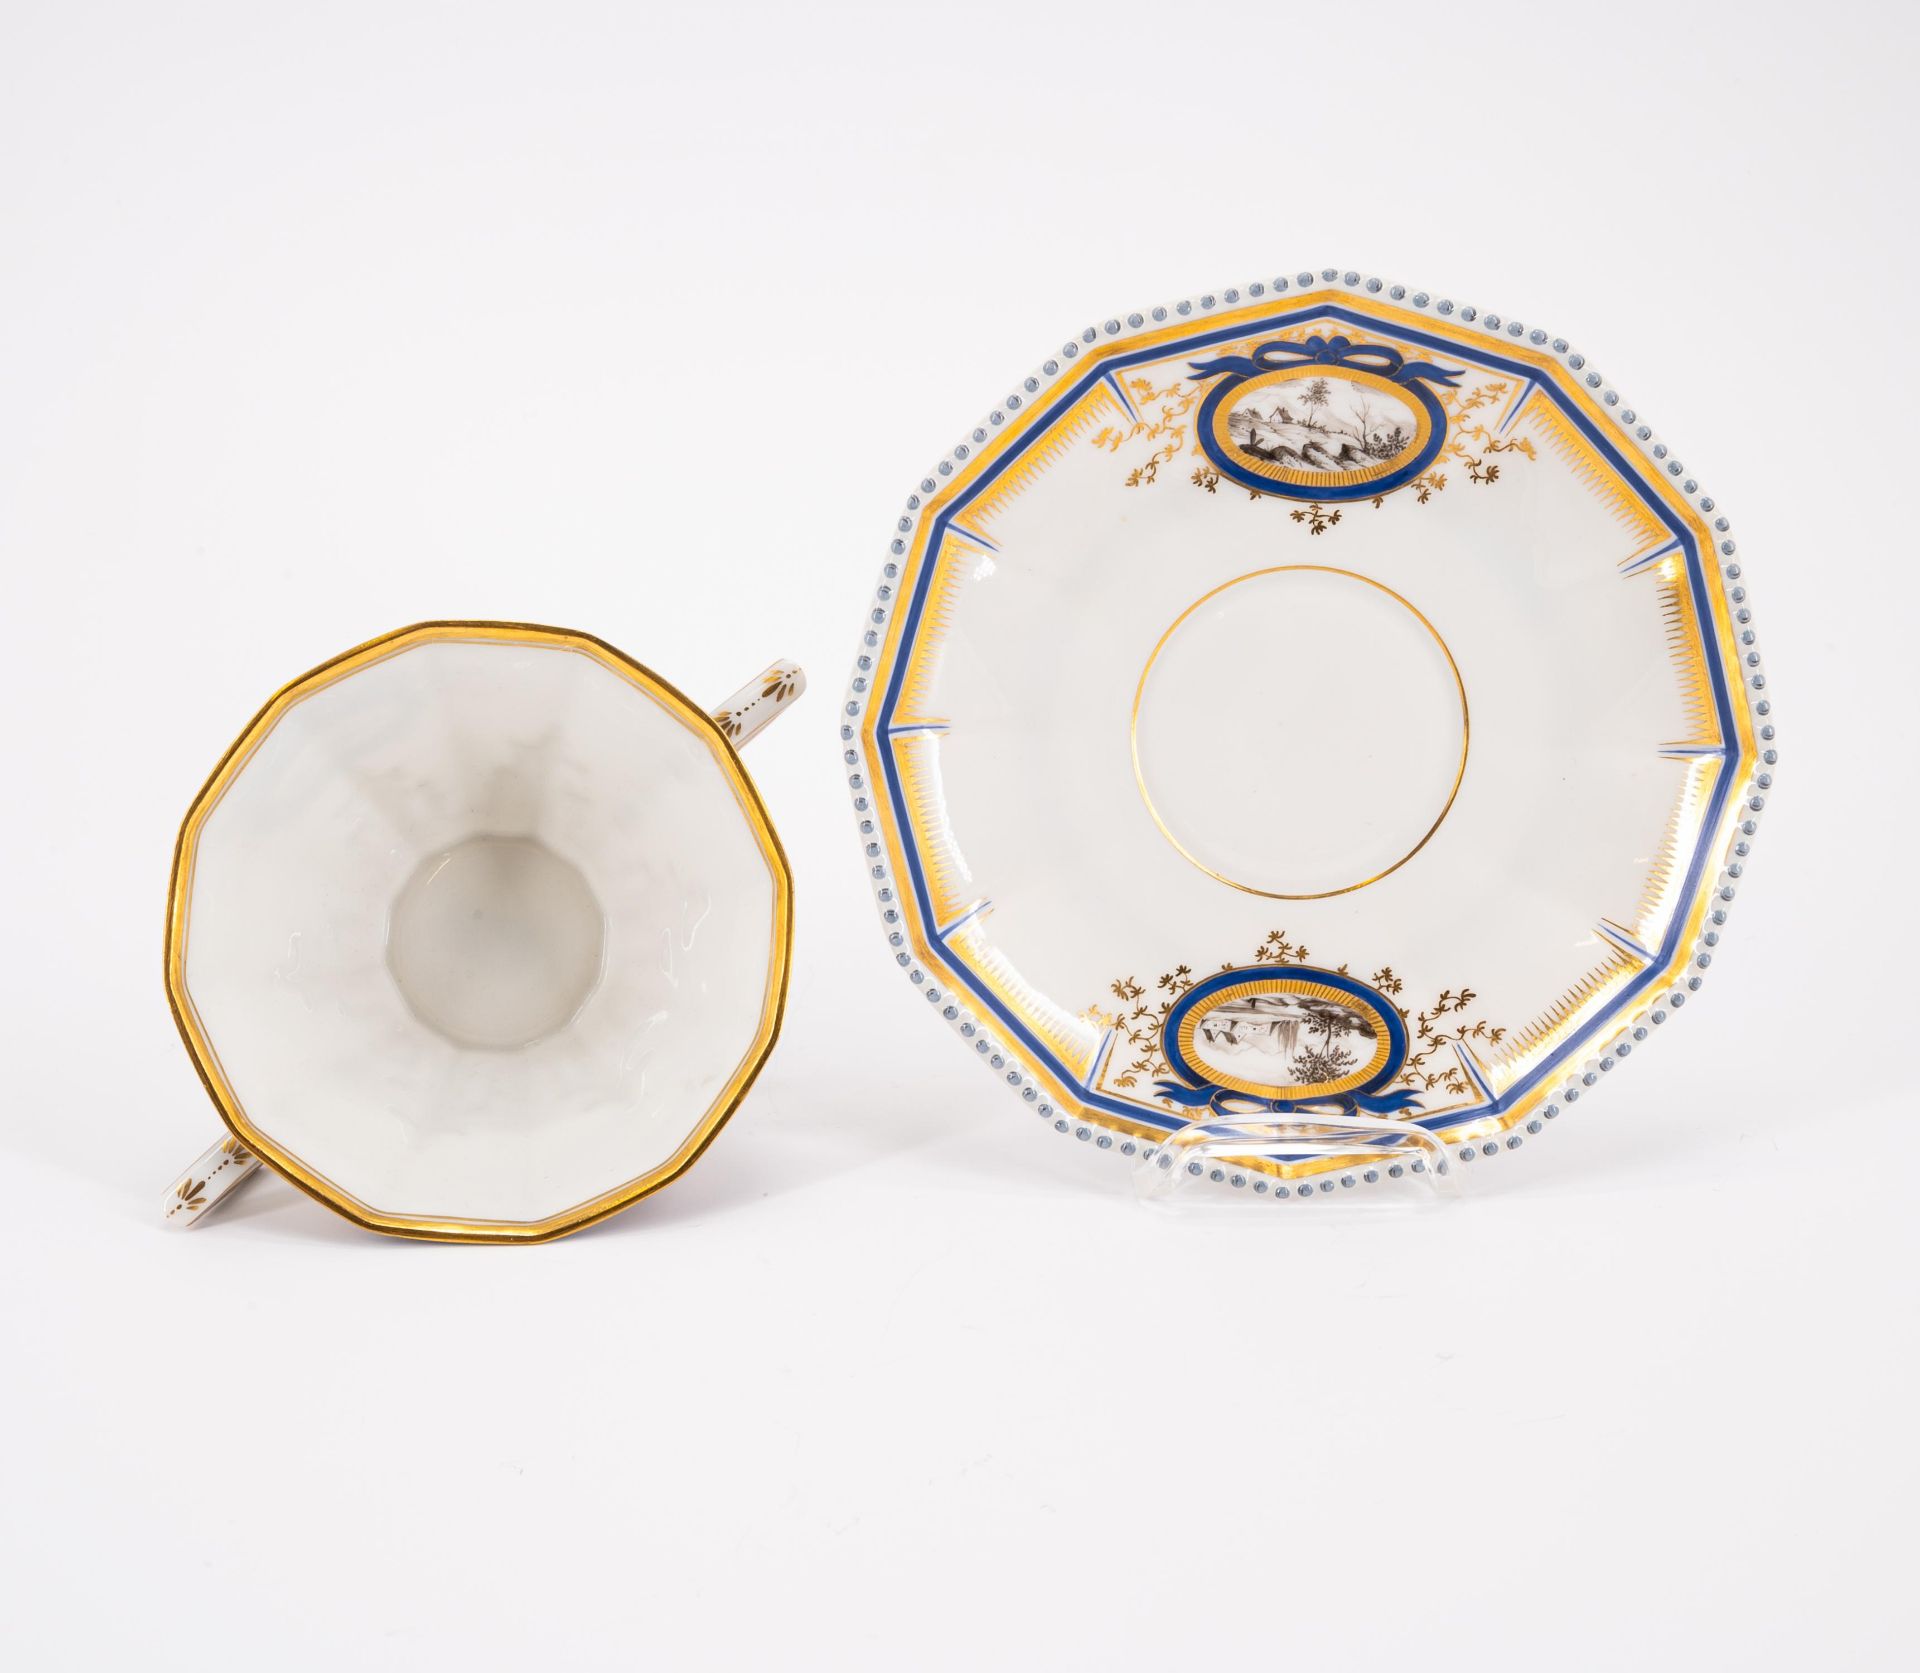 Nymphenburg: LARGE DINNER SERVICE 'ROYAL BAVARIAN' WITH 107 PIECES - Image 5 of 26